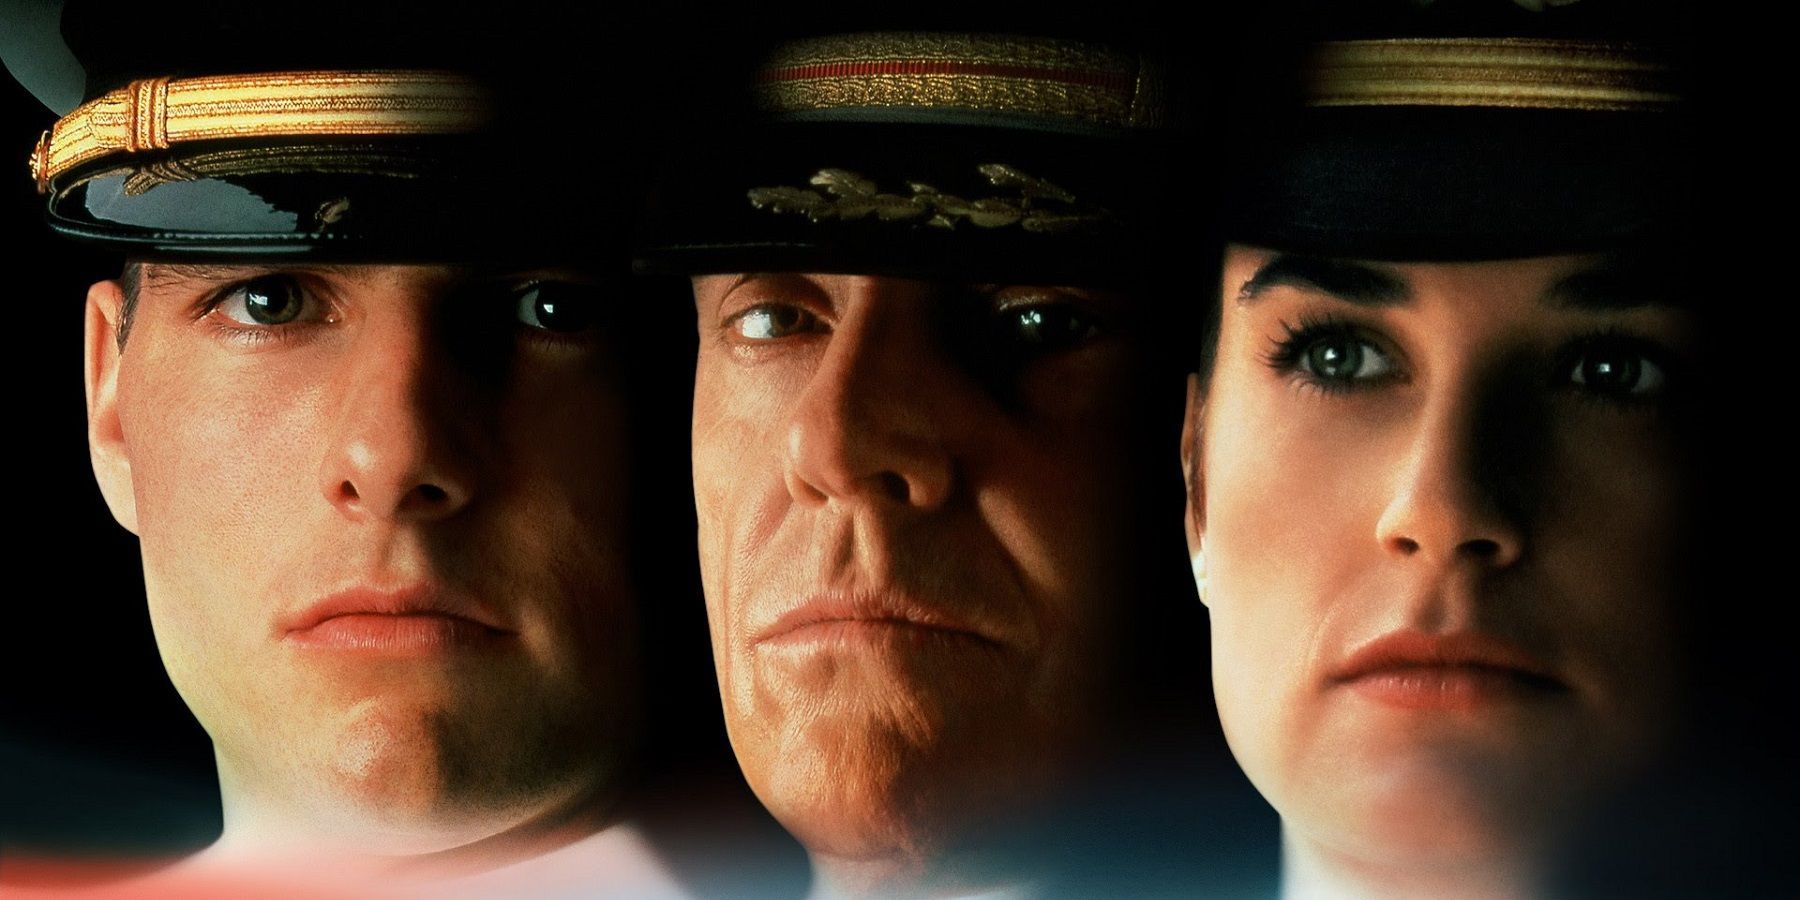 The cast of A Few Good Men is seen in the poster of the film 